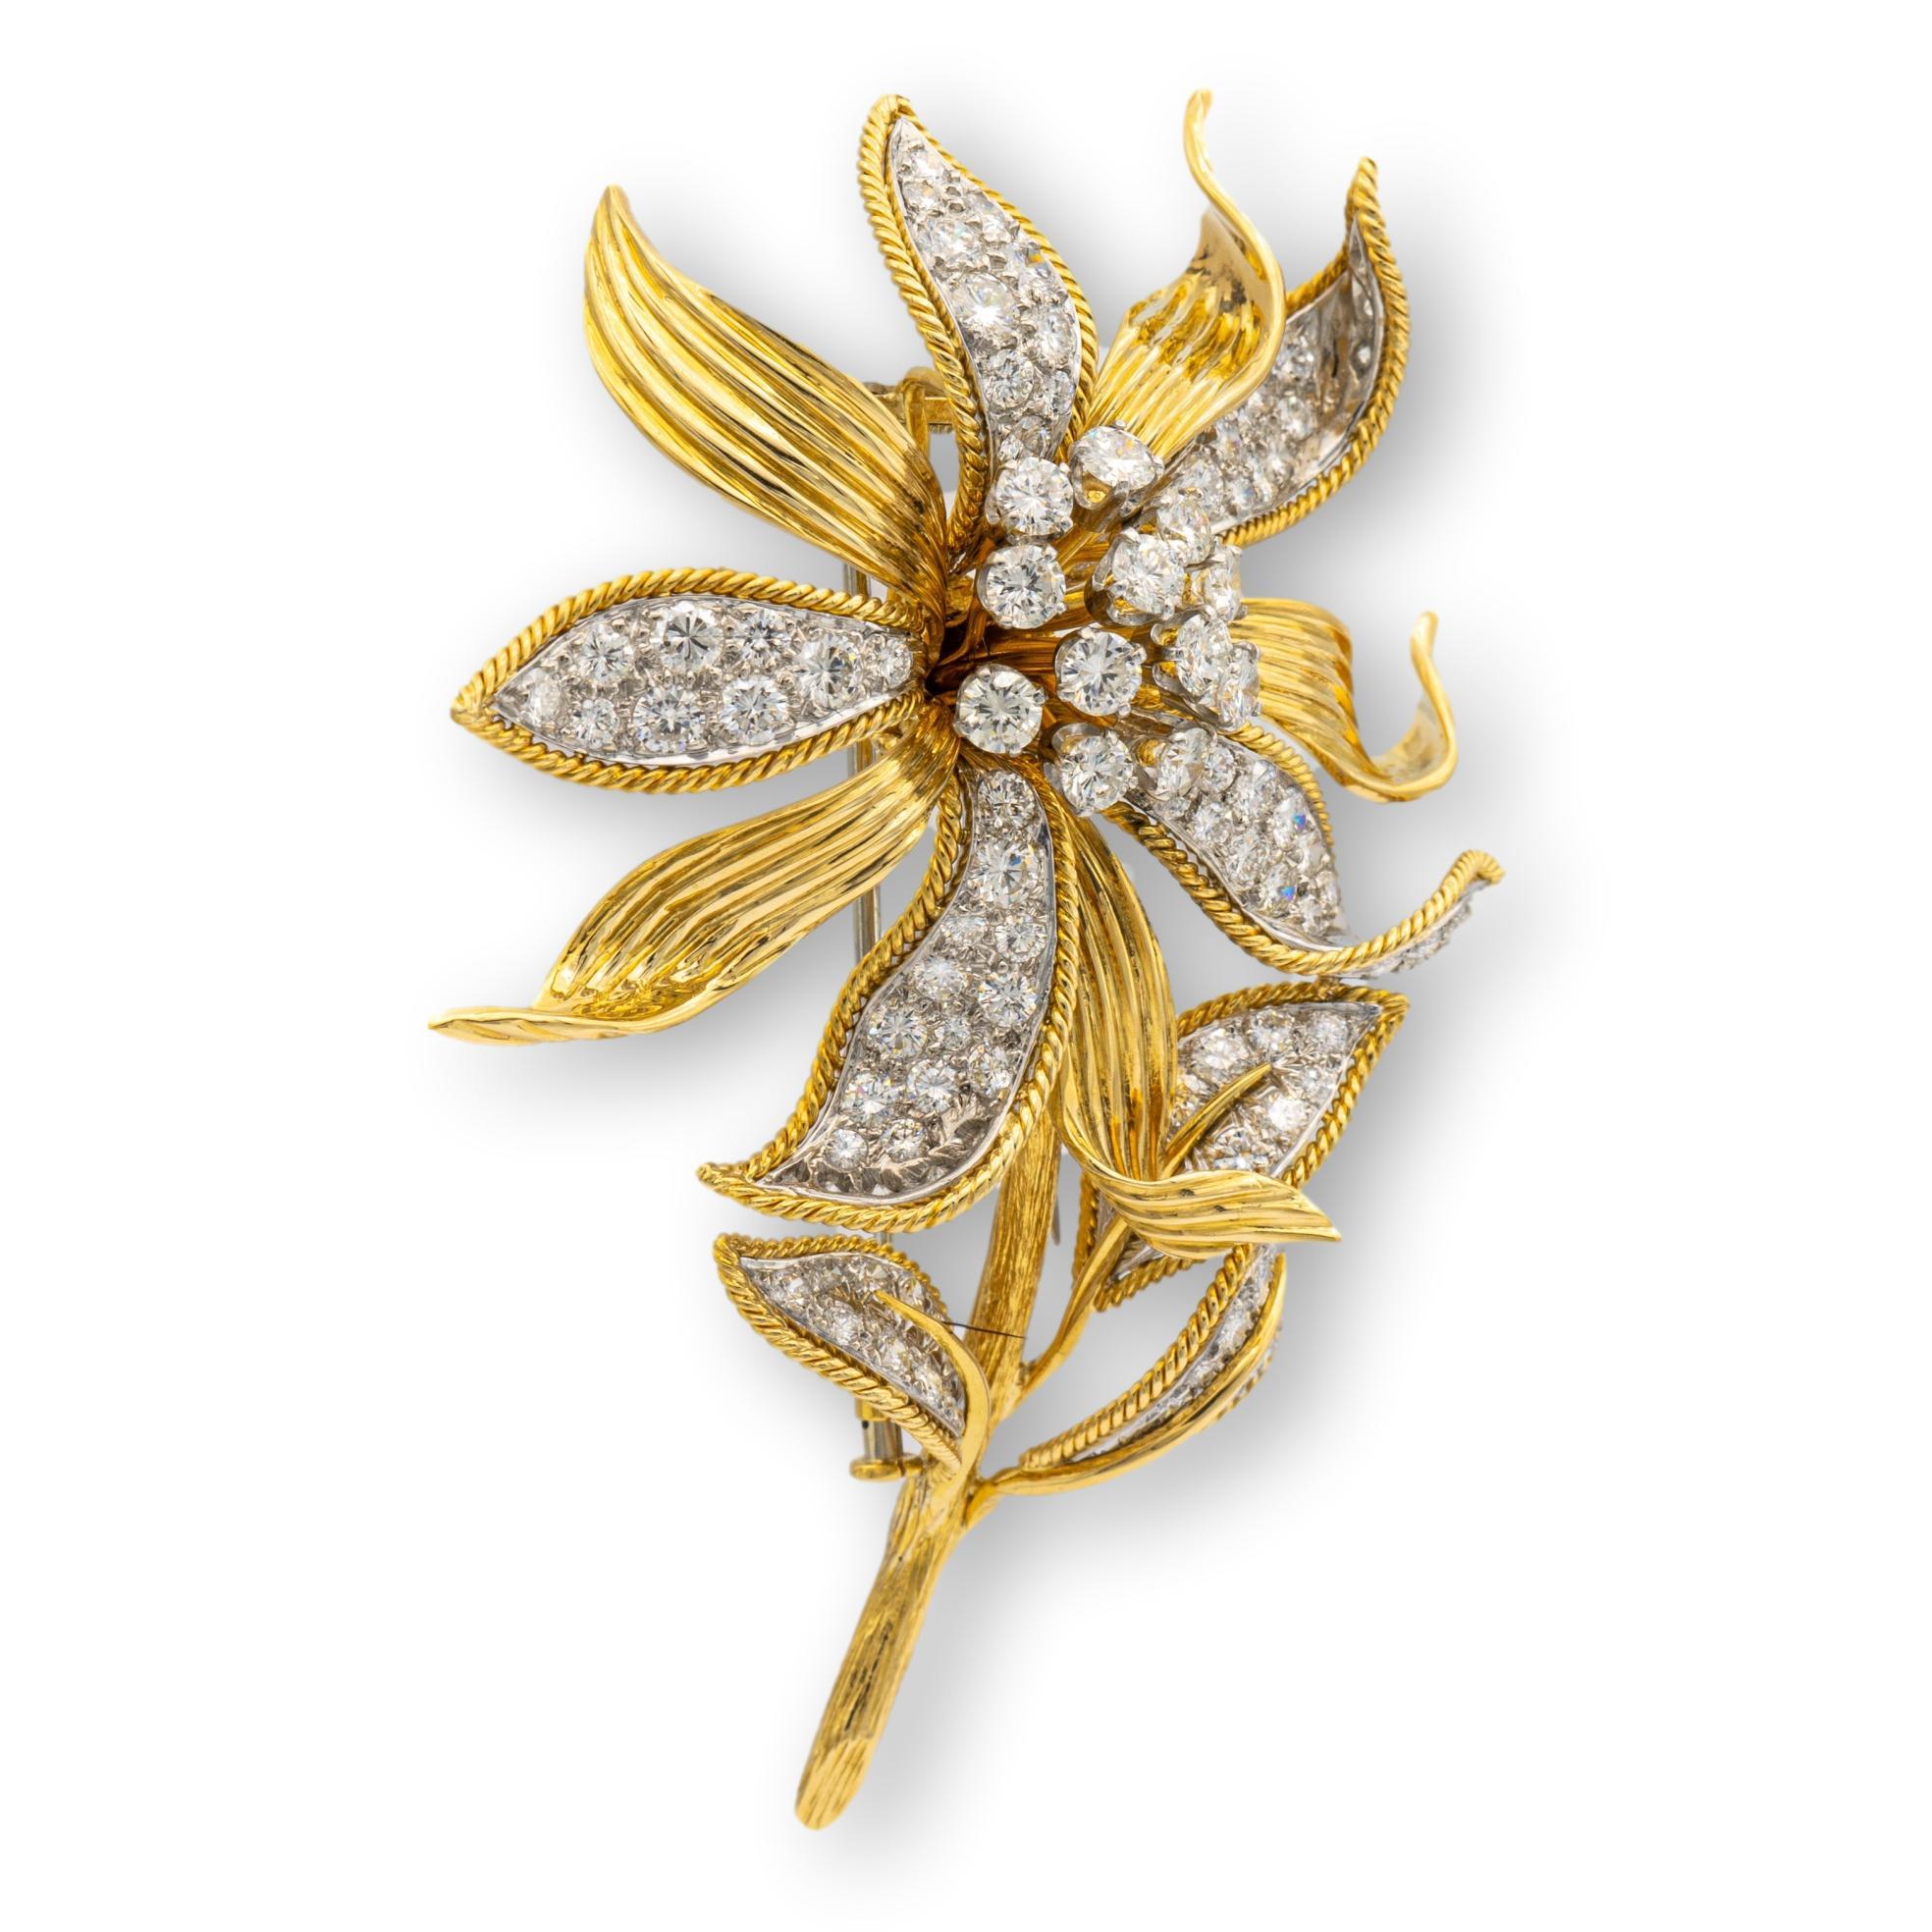 David Webb brooch finely crafted in 18 karat yellow gold in a flower motif design featuring round brilliant cut diamonds on top of platinum sections. The center of the brooch features an en-tremblant ( trembling feature) cluster of fine quality